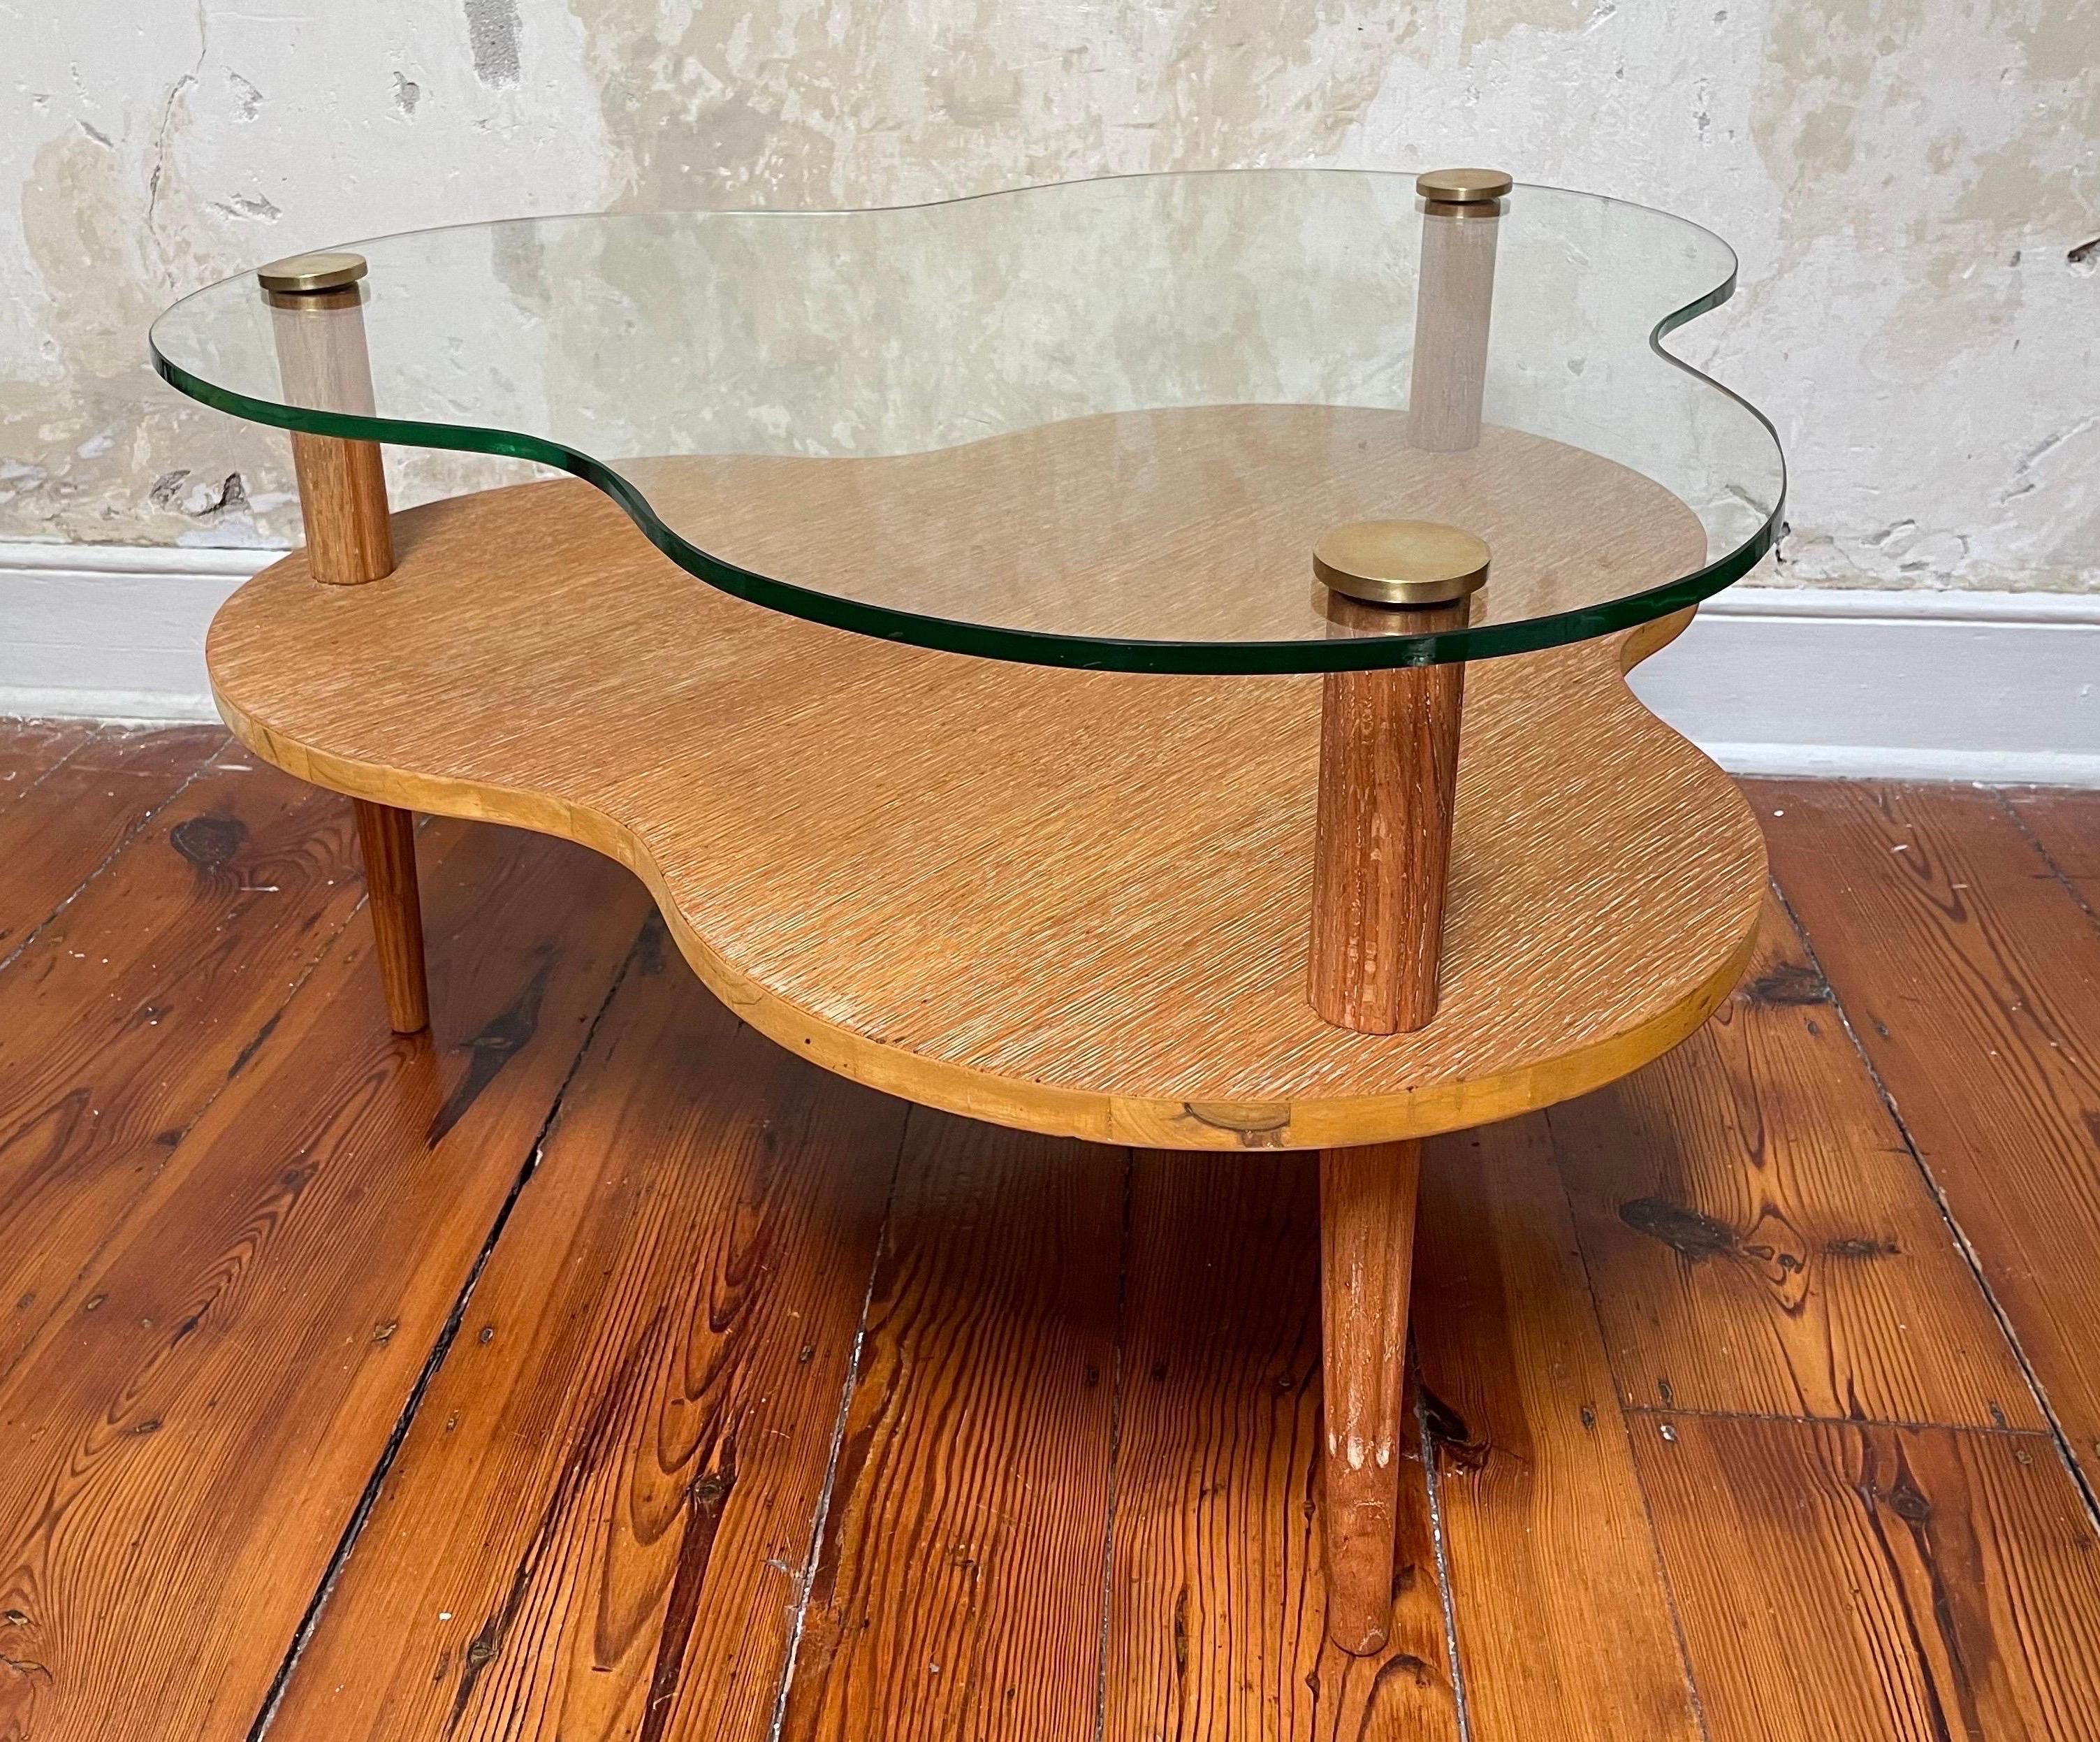 A glass and cerused oak 2 tier cloud shaped coffee table (or oversized accent table) with carved tripod legs and brass caps. Designed by Gilbert Rhode for Herman Miller for the early 1940s Paldao Group. The forms and materials of this line paid